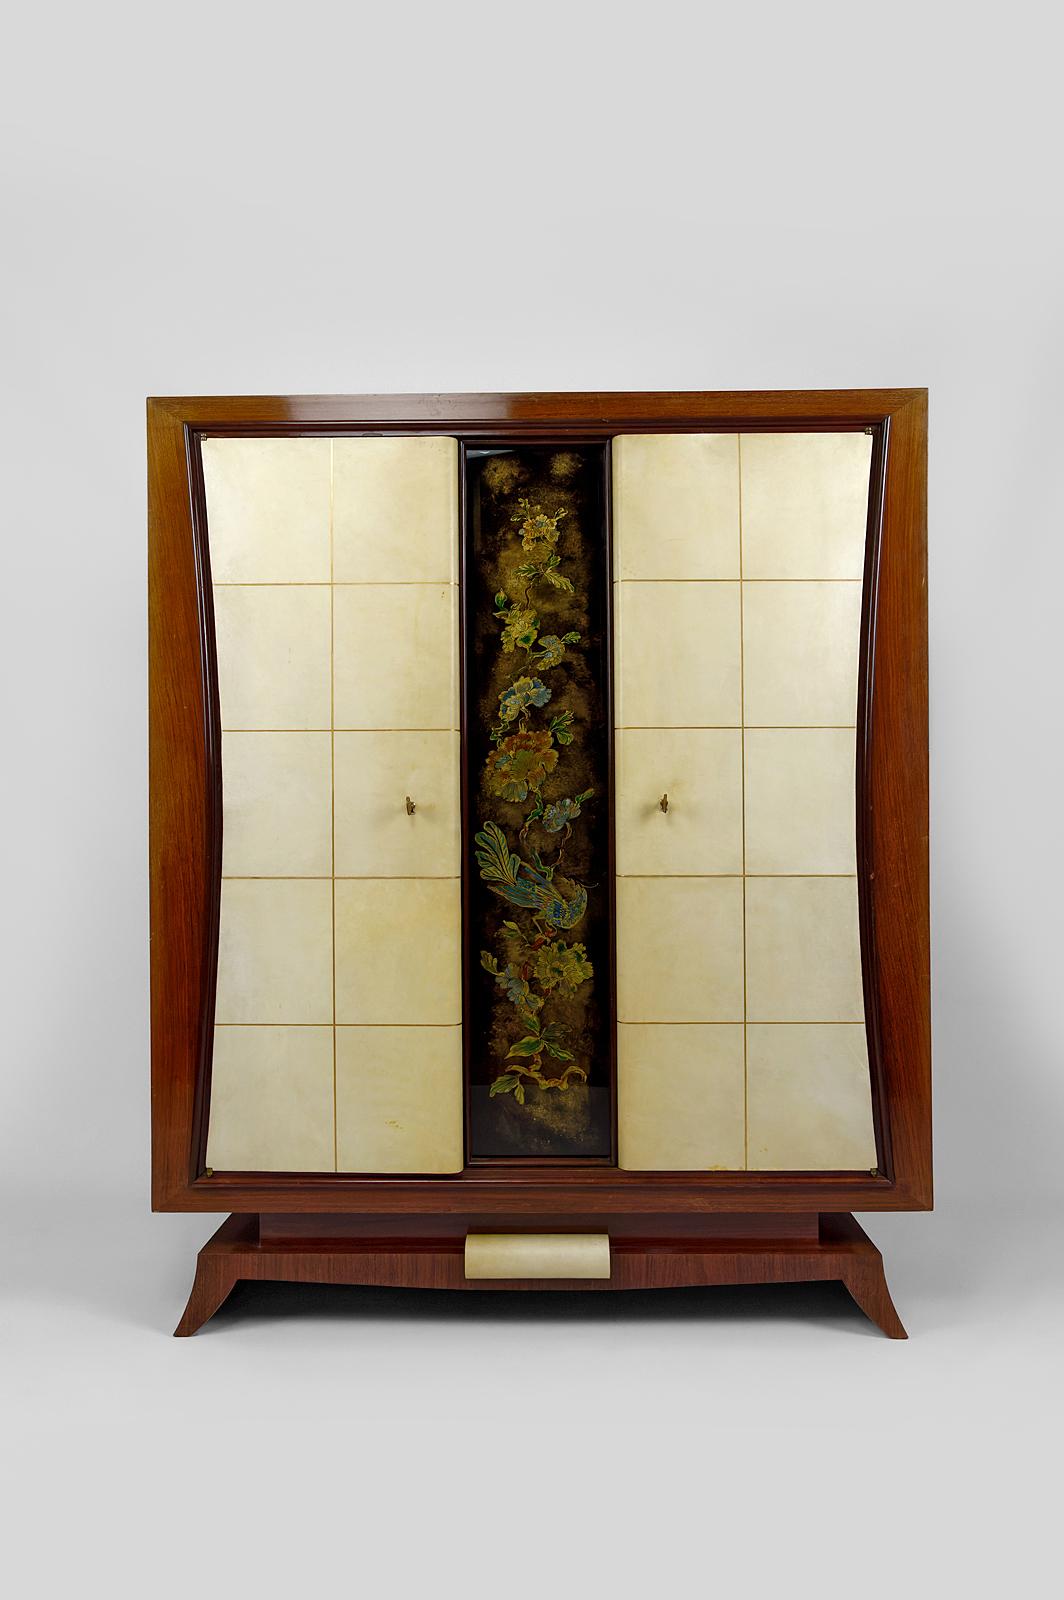 Mahogany veneer
2 doors covered in vellum leather, squared with gilding.

In the center, églomisé/painted glass plaque depicting a majestic bird on a branch, surrounded by Japanese-style flowers.

2 keys, locks OK.
2 shelves

Art Deco, France, circa